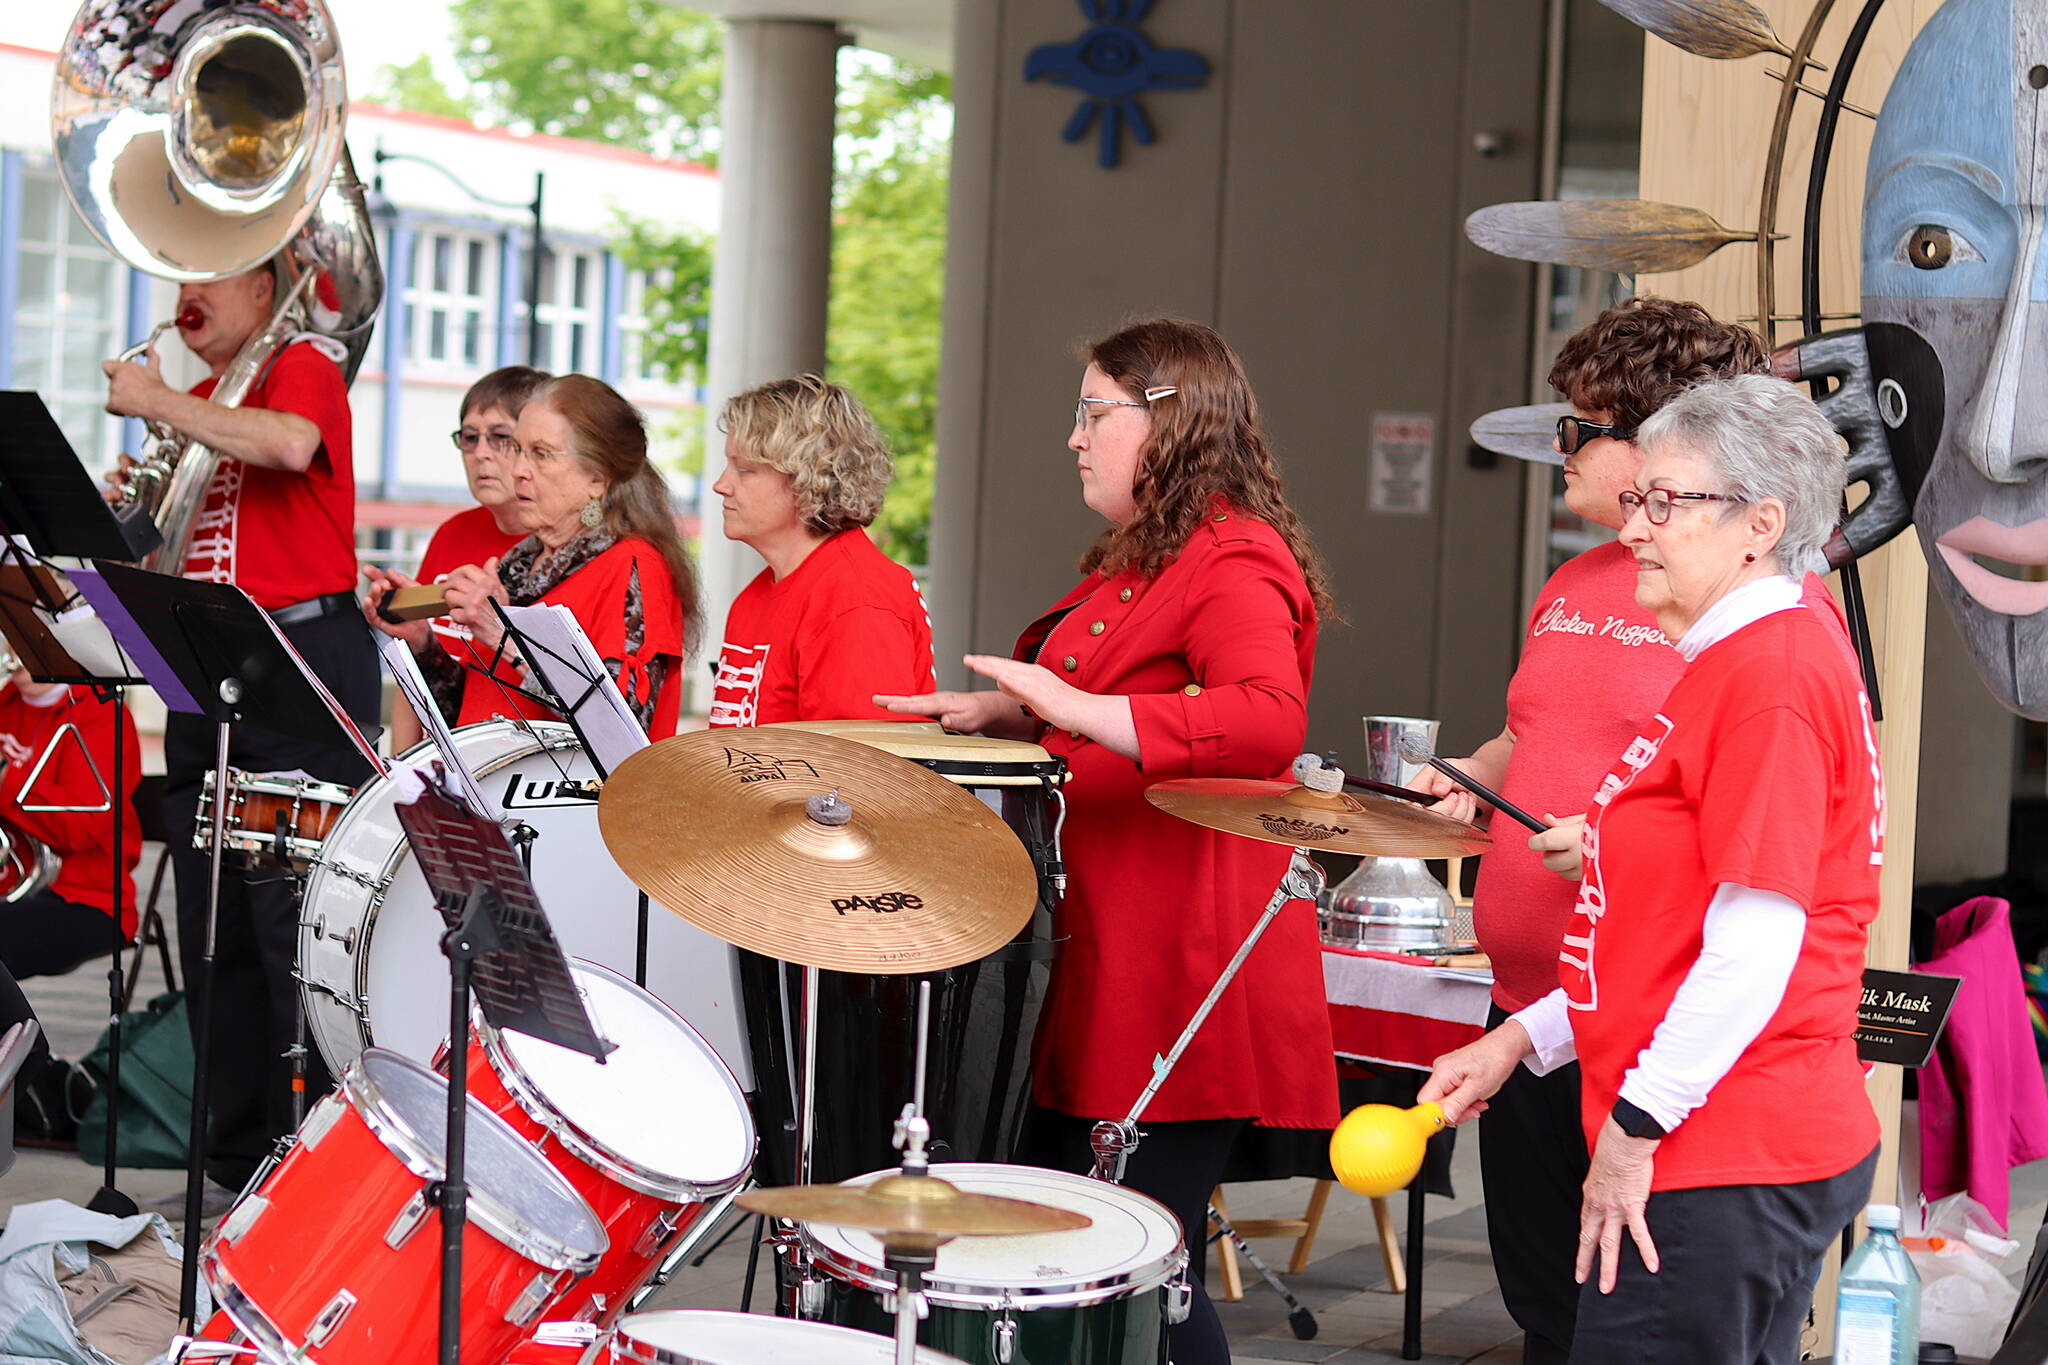 A row of percussion players perform as part of the Juneau Volunteer Marching Band on Sunday at Sealaska Heritage Plaza (Mark Sabbatini / Juneau Empire)